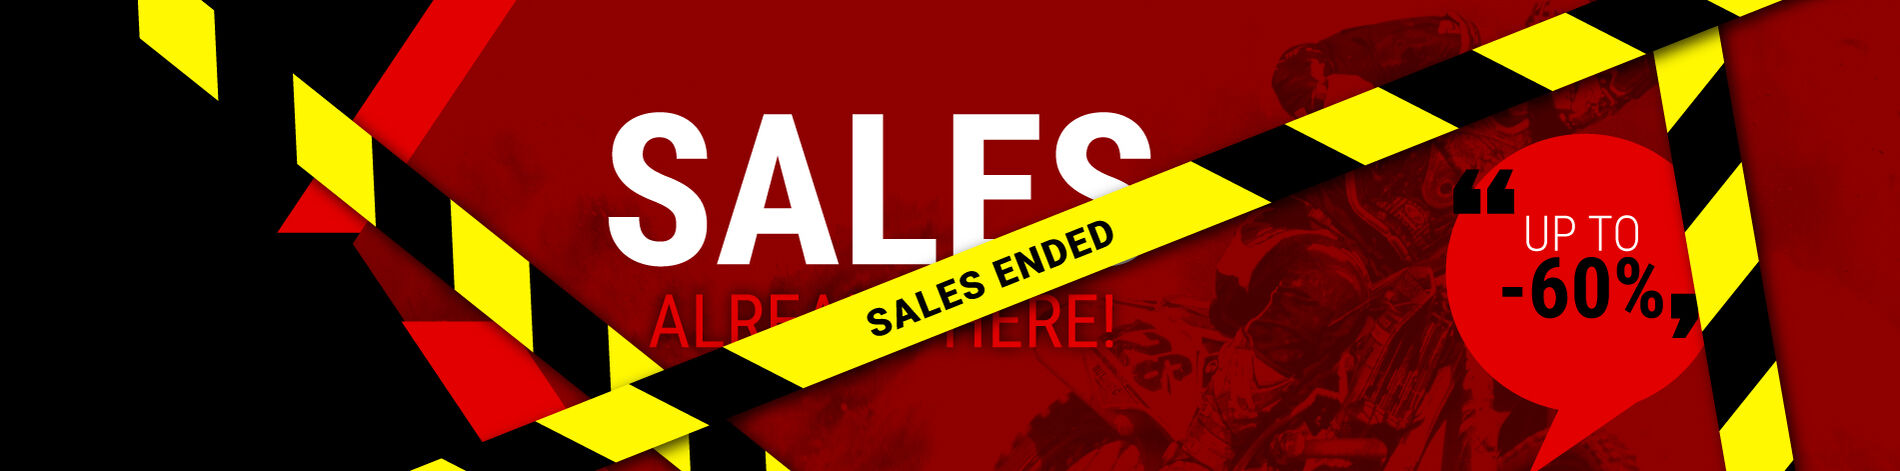 Winter sales ended